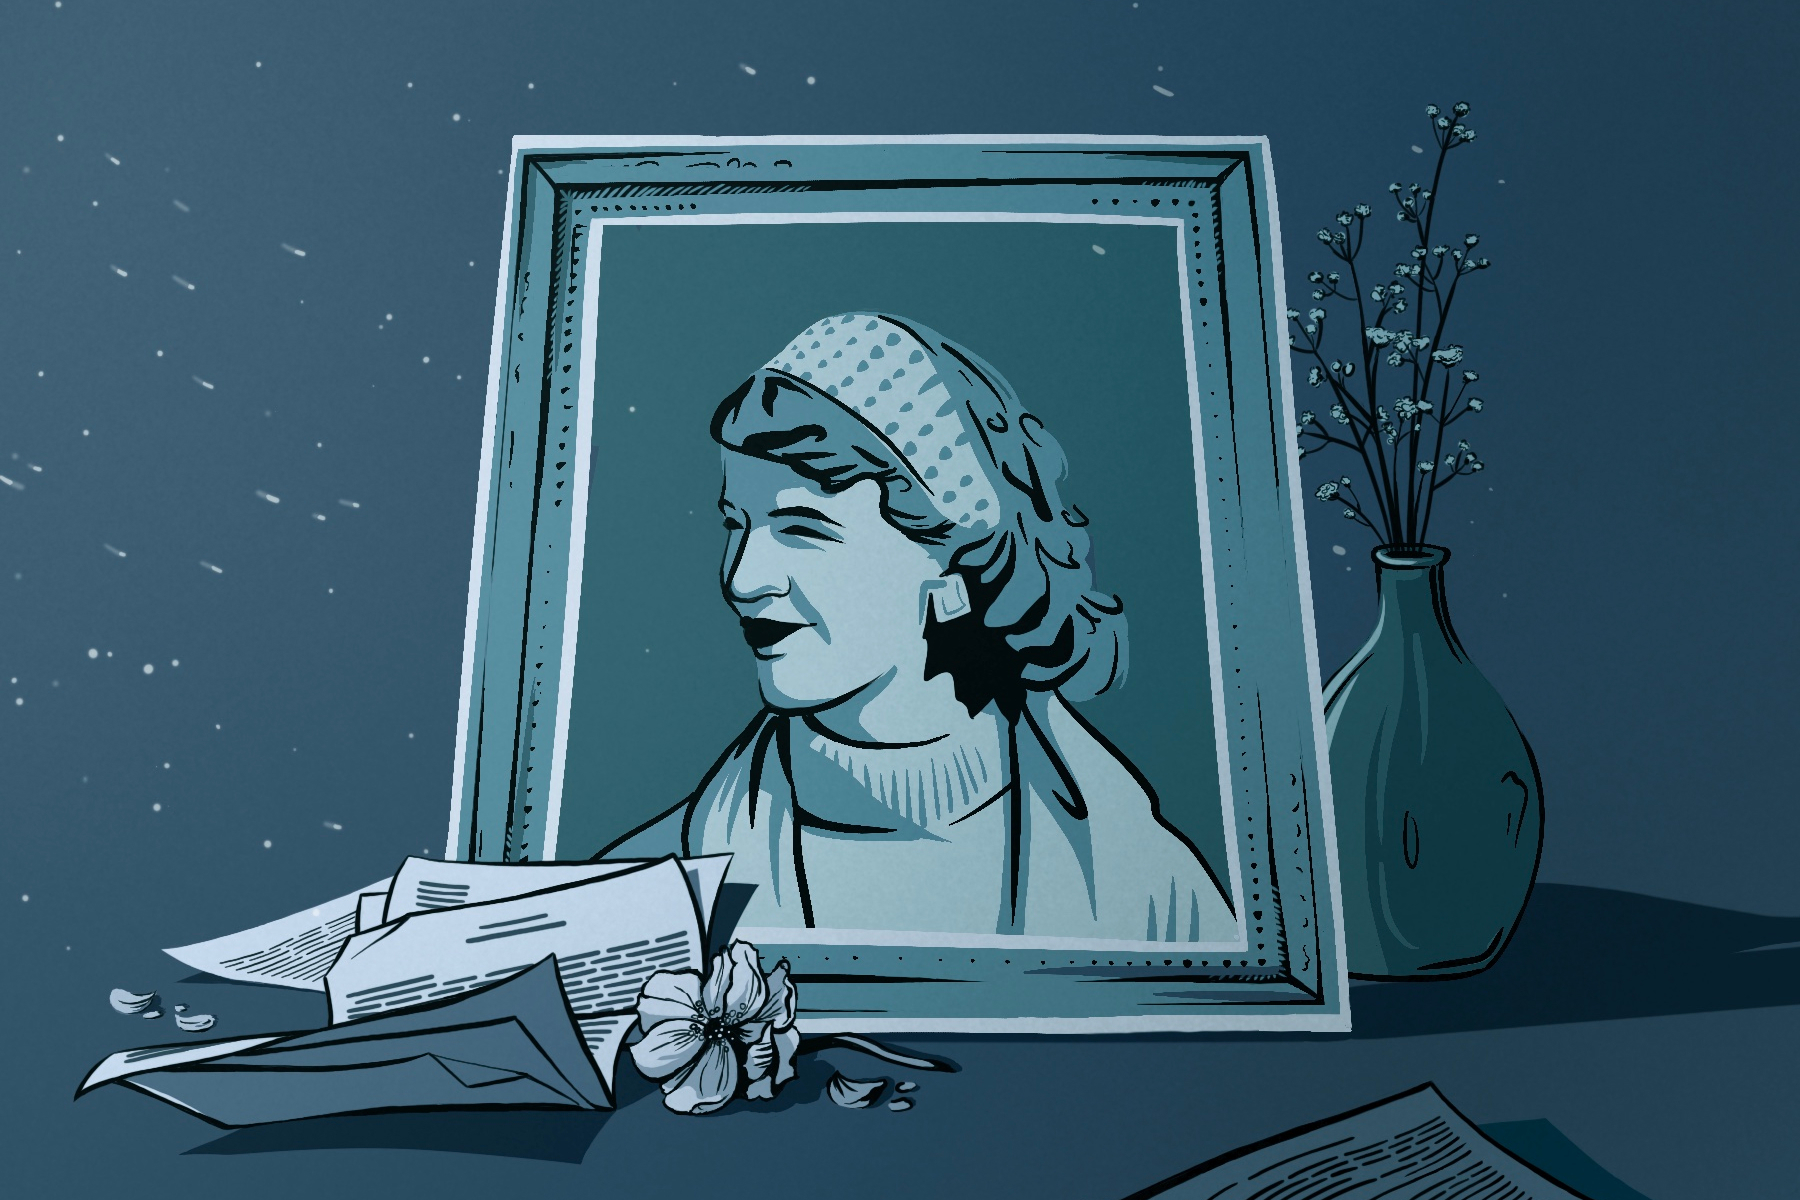 To depict the pervasive dangers of the ideal of the tortured artist, an aestheticized sorrowful, muted blue-toned illustration shows a portrait of Sylvia Plath, who died by suicide, in a frame placed next to flowers and manuscripts.